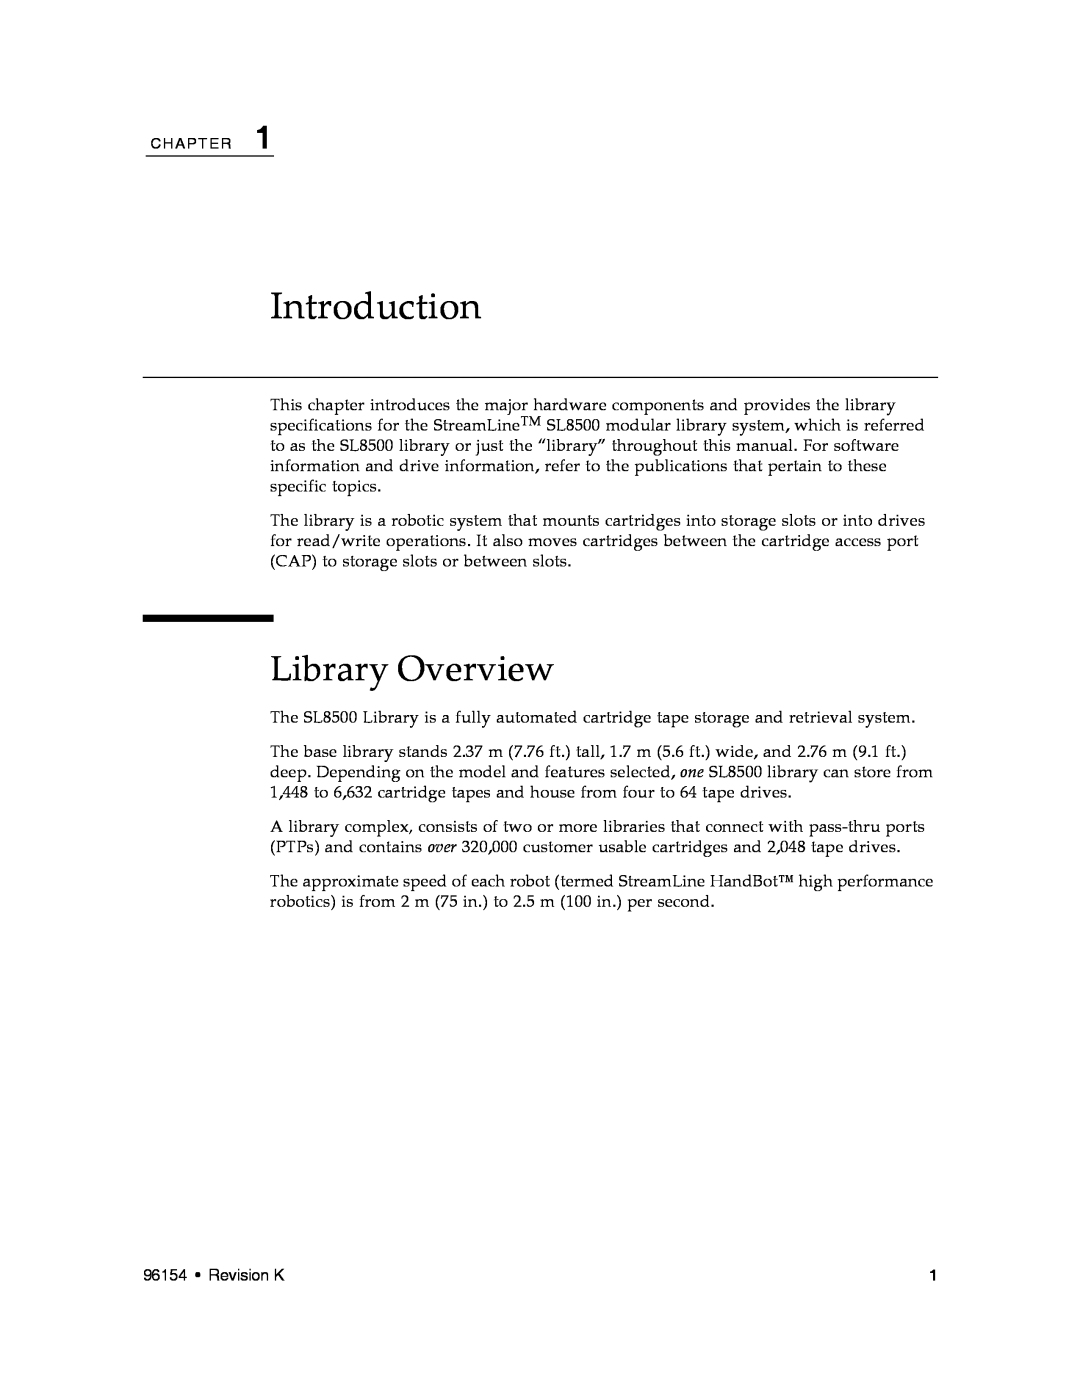 Sun Microsystems SL8500 manual Introduction, Library Overview 